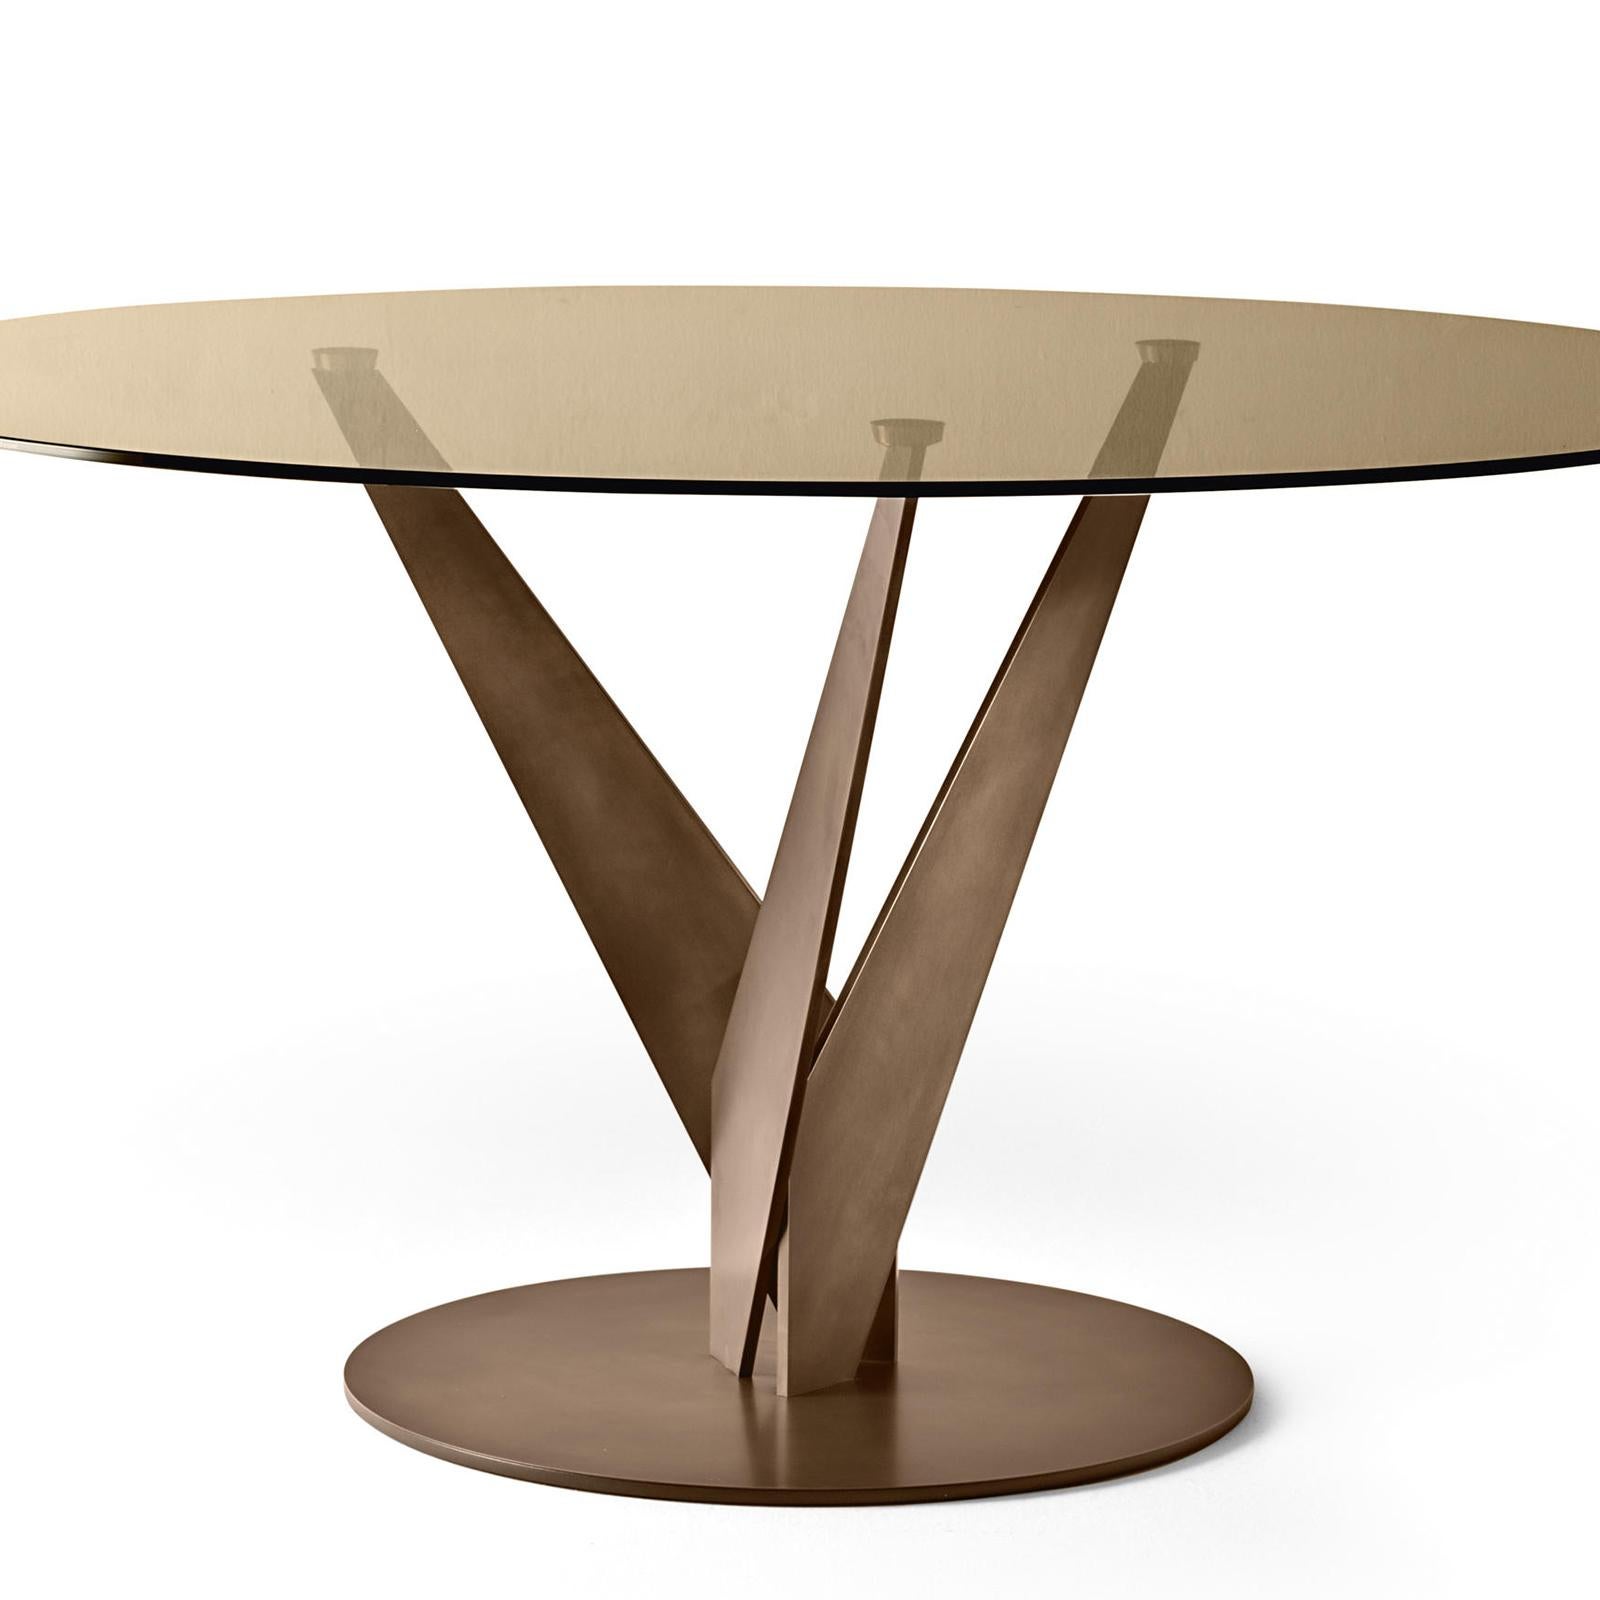 Table ellipse brass and bronzed with tempered bronzed
glass top, 10mm thickness. With burnished brass feet.
Available in:
Diameter 120 x height 75cm, price: 8600,00€.
Diameter 140 x height 75cm, price: 8900,00€.